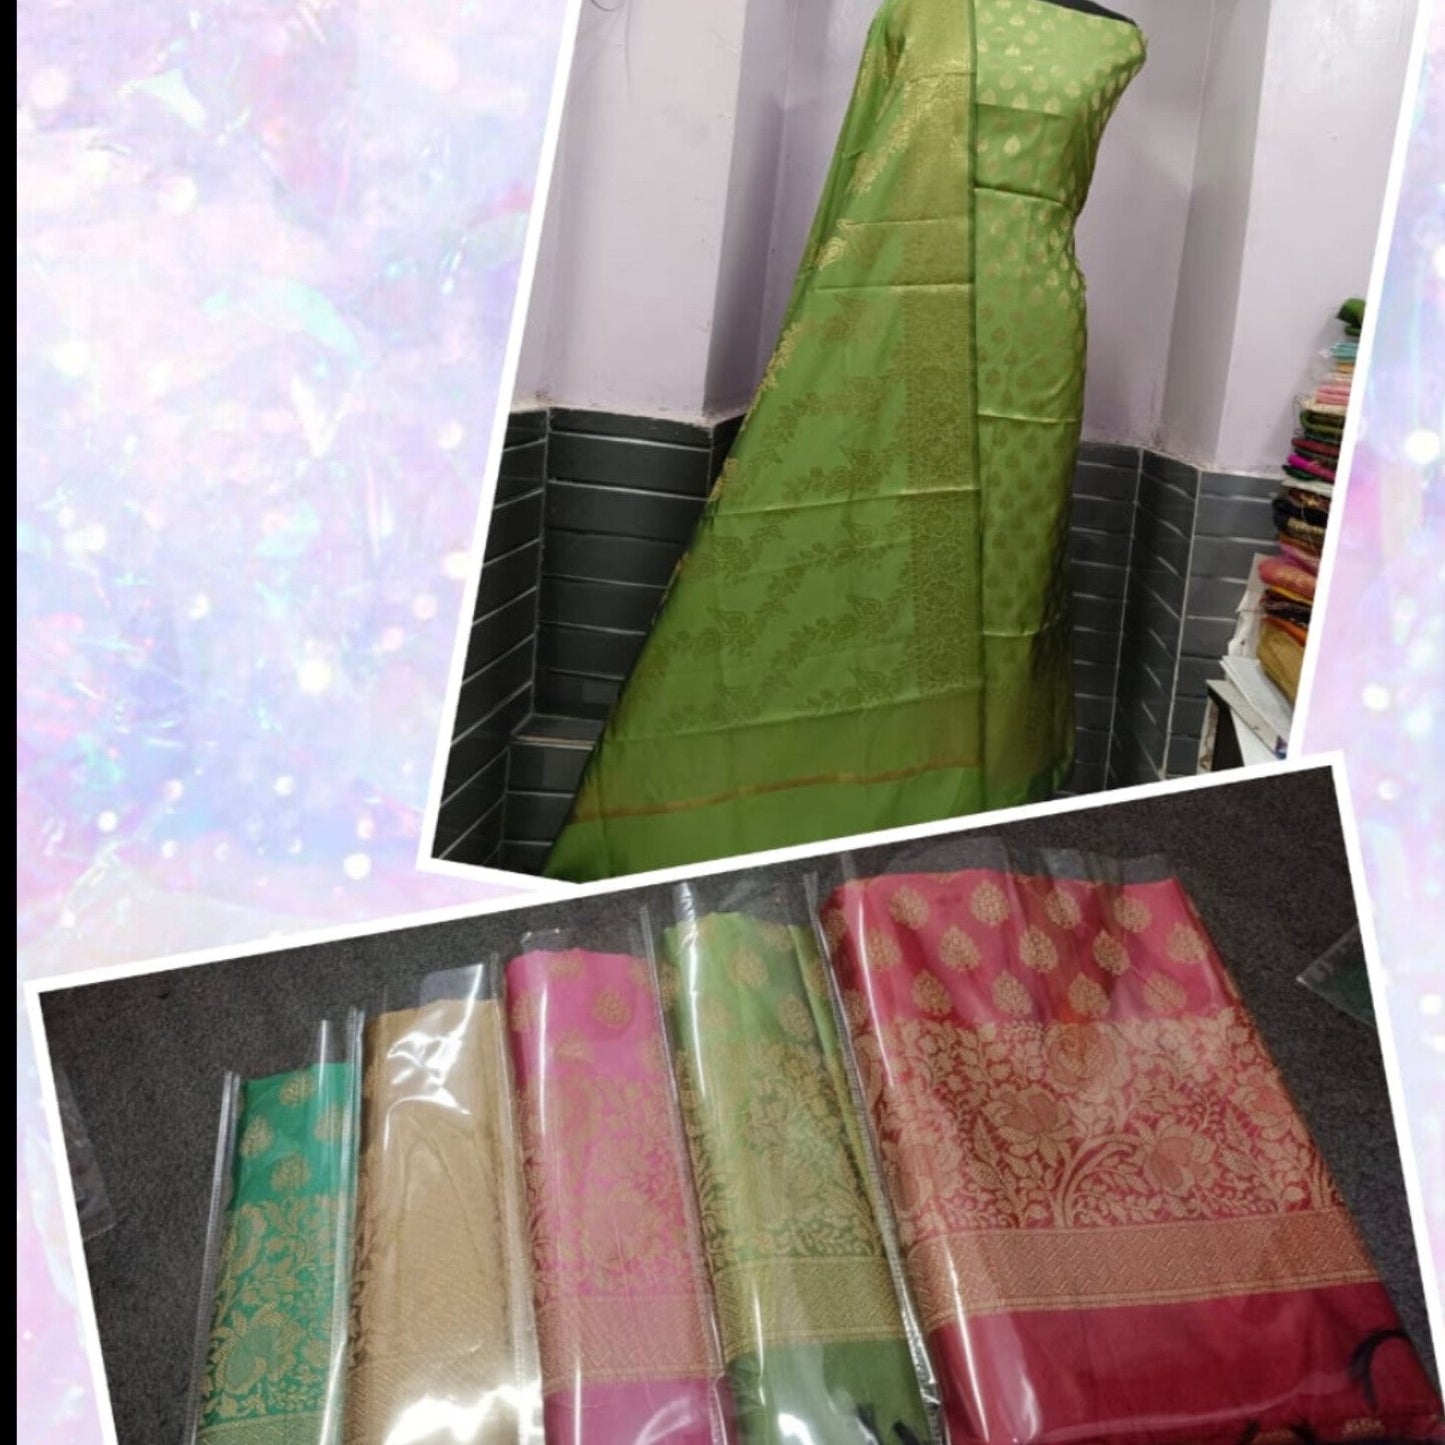 Banarasi Katan Silk Mix Unstitched Suit Material - Olive Green, Red (Various Colours available)